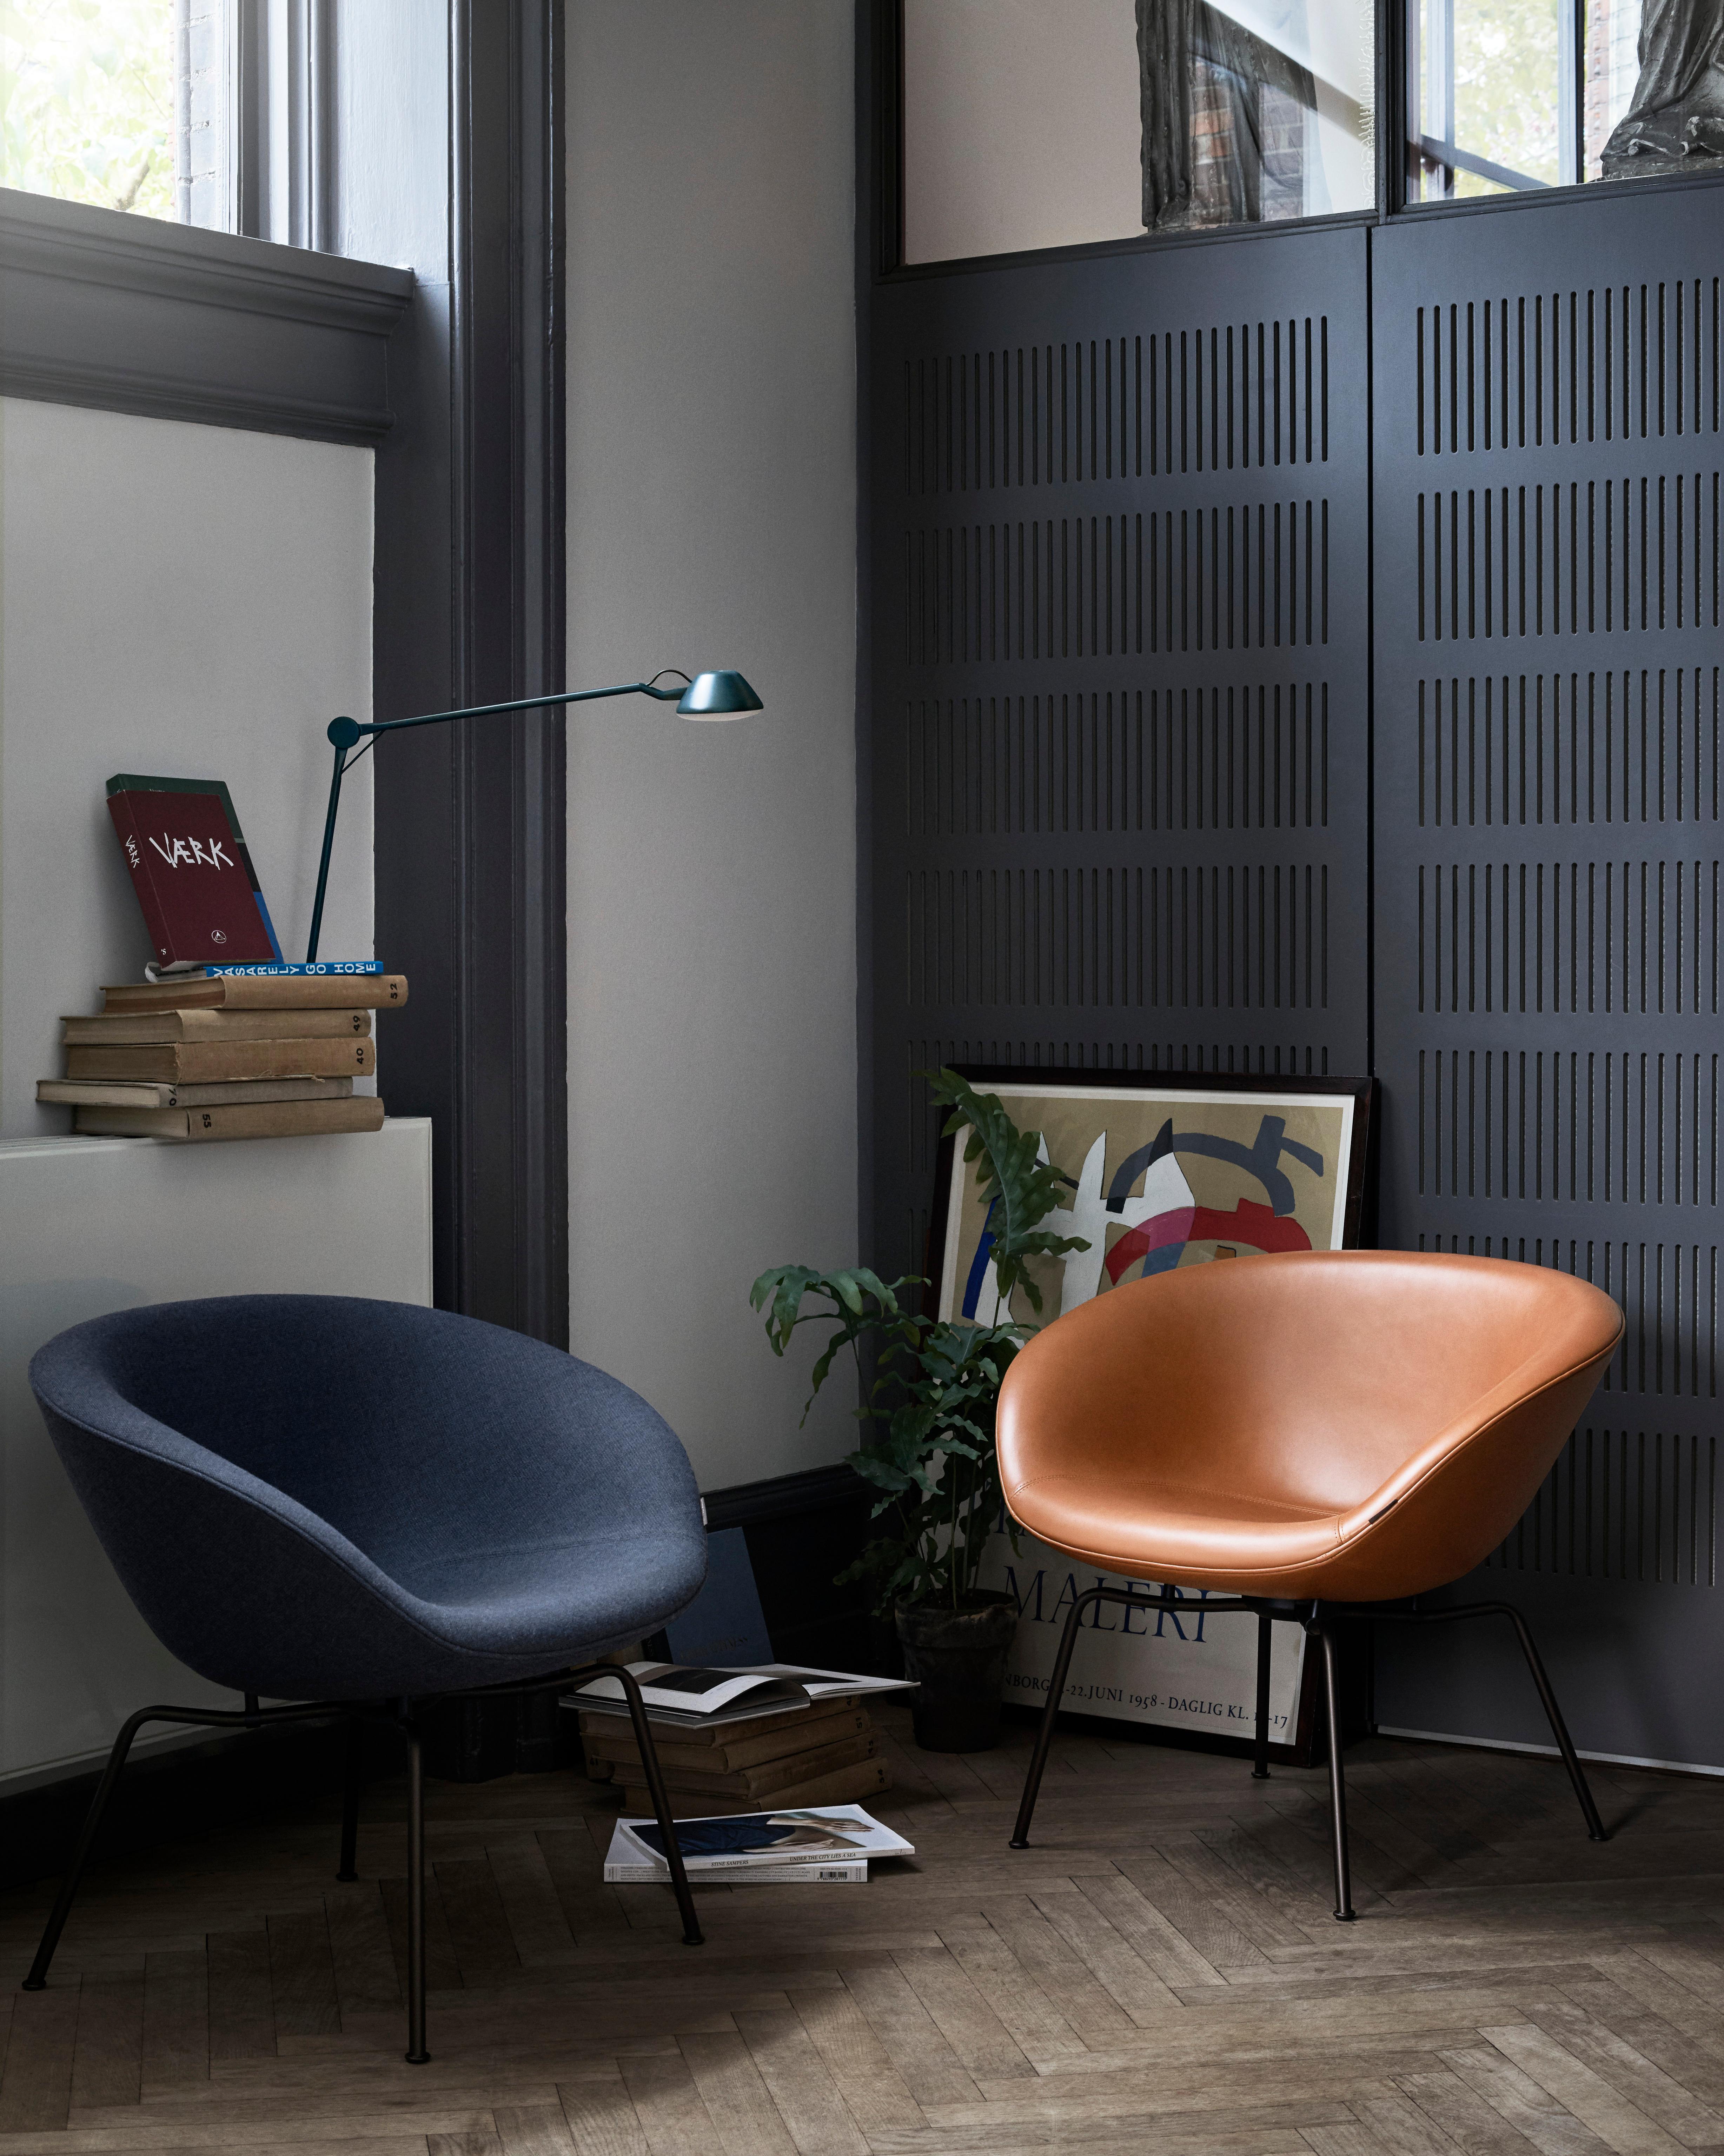 Anne Qvist 'AQ01' Table Lamp in blue for Fritz Hansen.

Established in 1872, Fritz Hansen has become synonymous with legendary Danish design. Combining timeless craftsmanship with an emphasis on sustainability, the brand’s re-editions of iconic